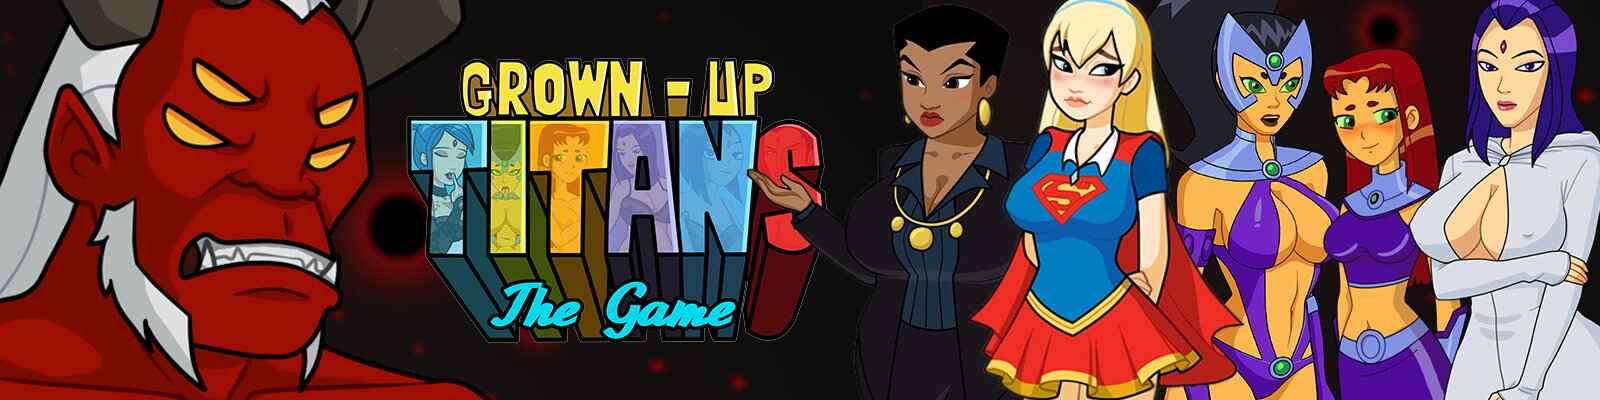 grown up titans the game download